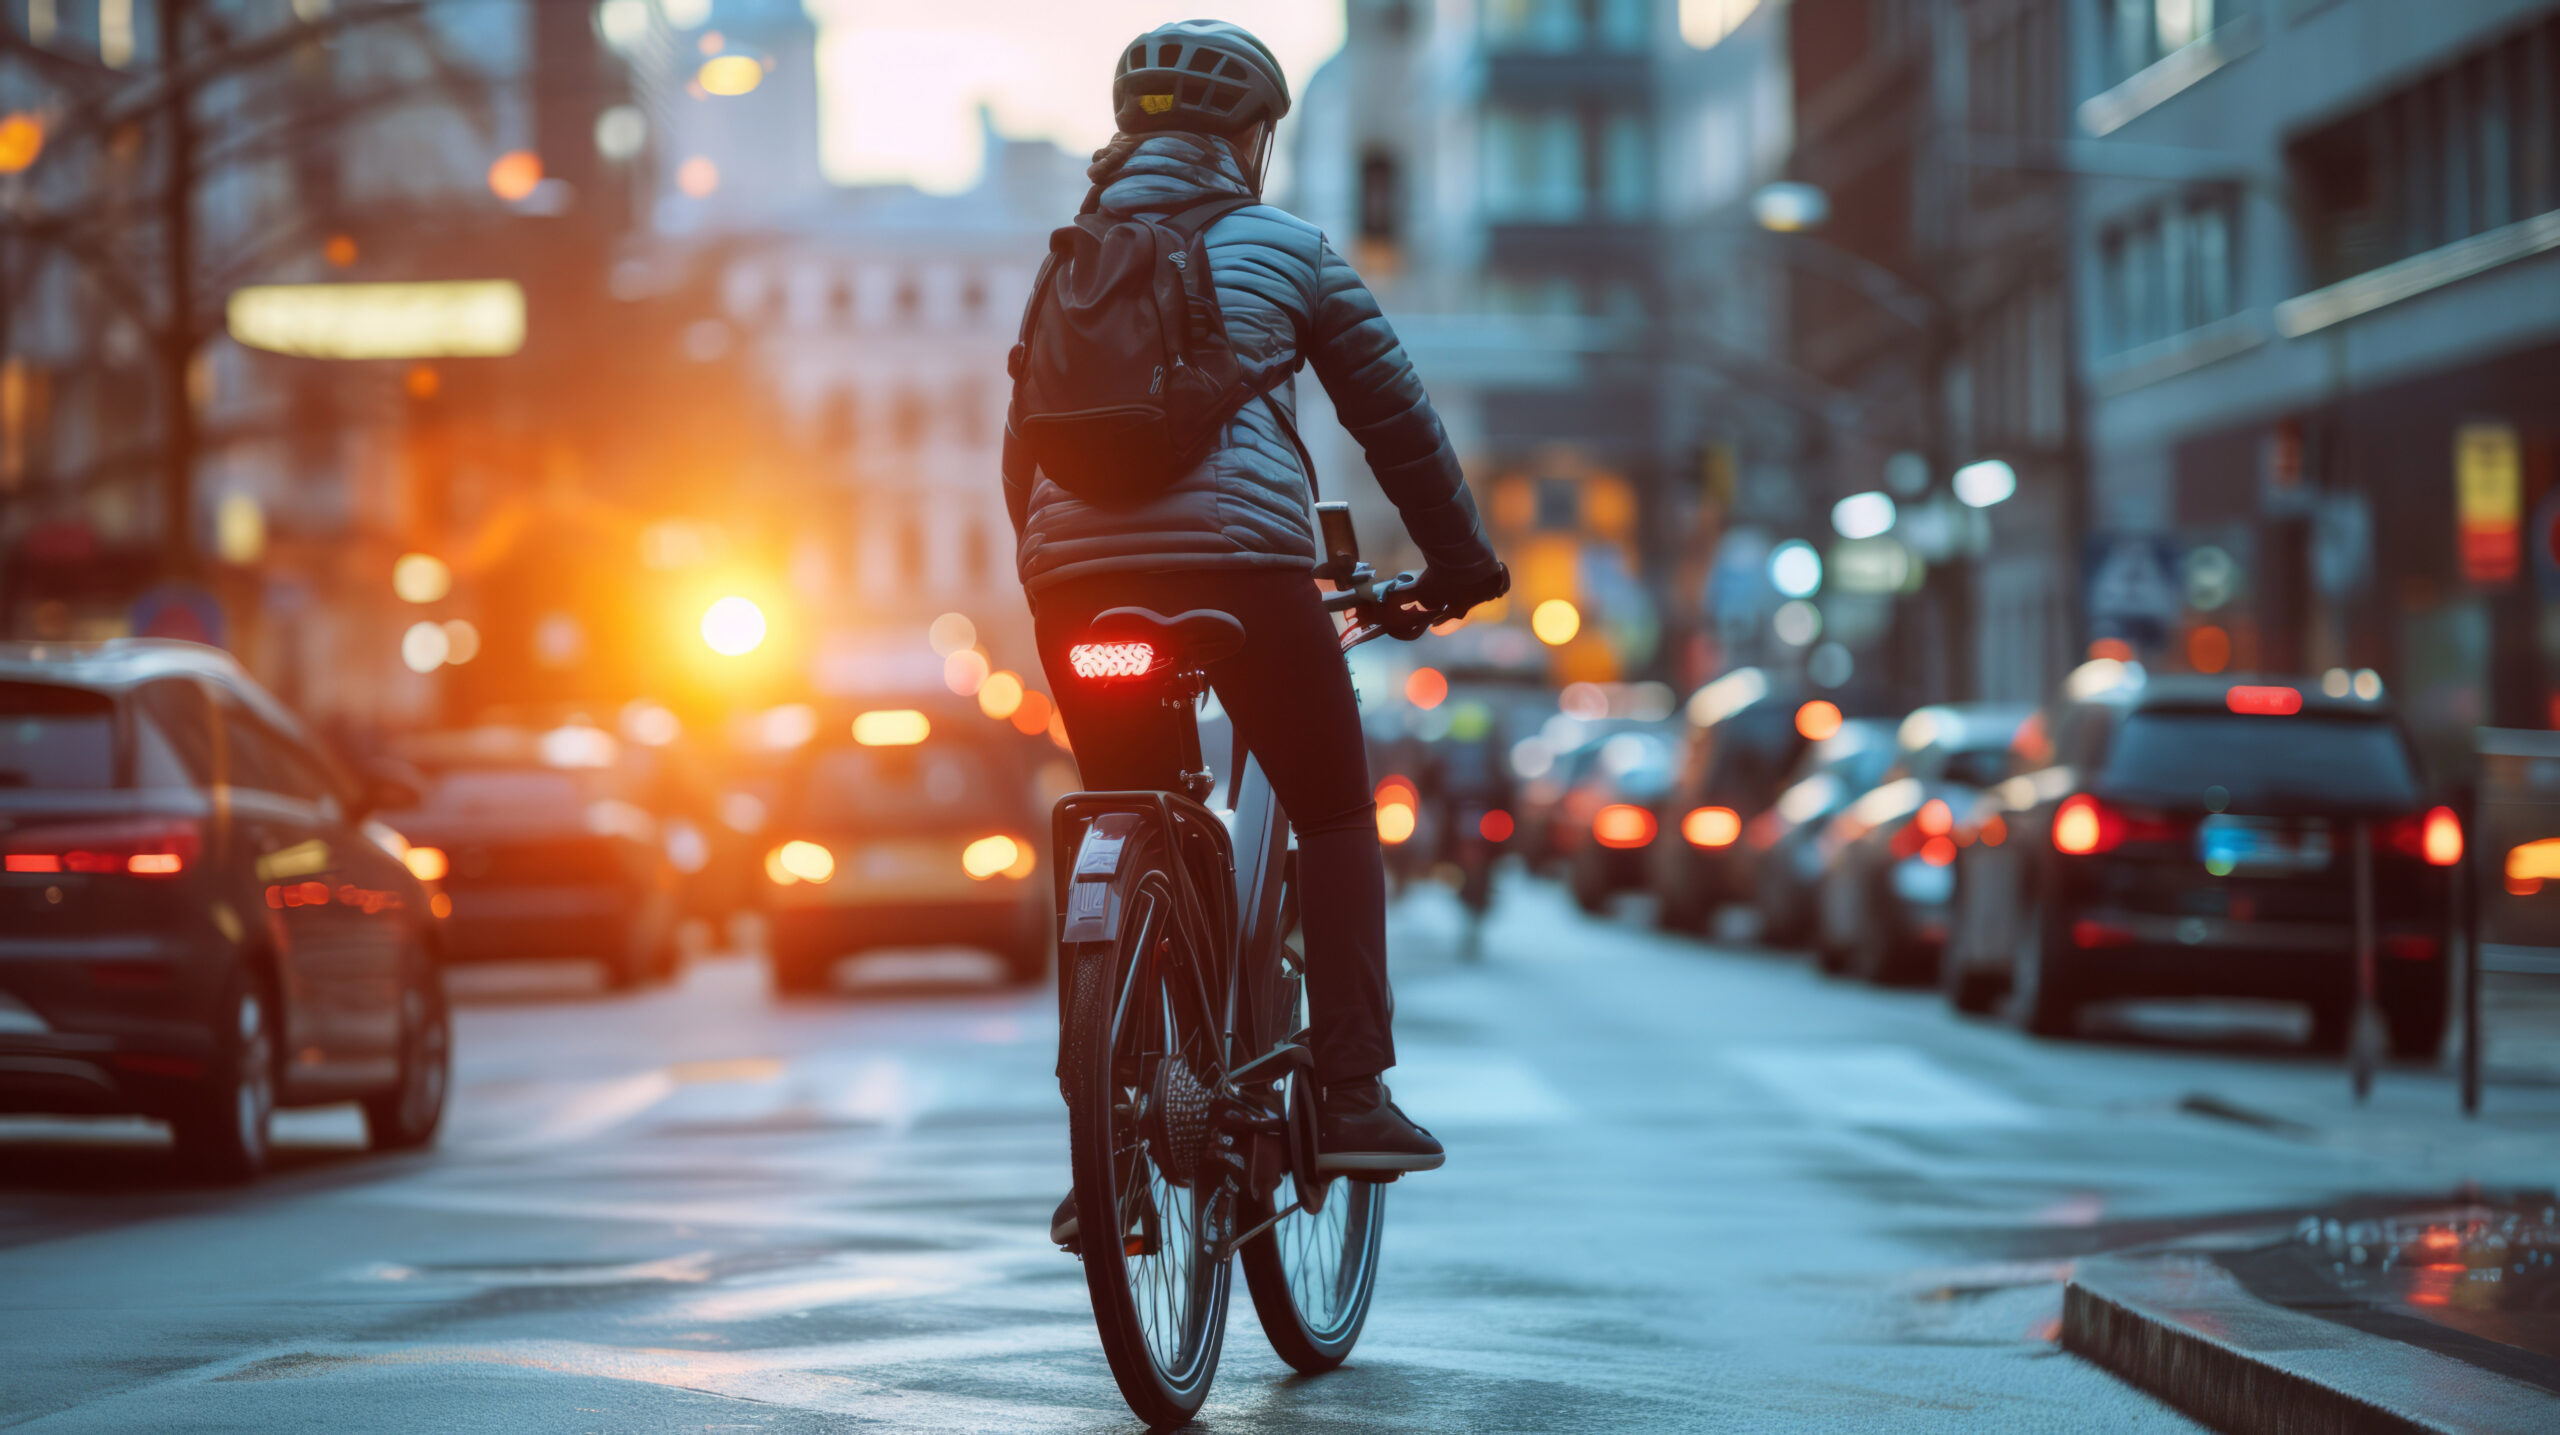 Individual riding an electric bicycle in city traffic at sunset